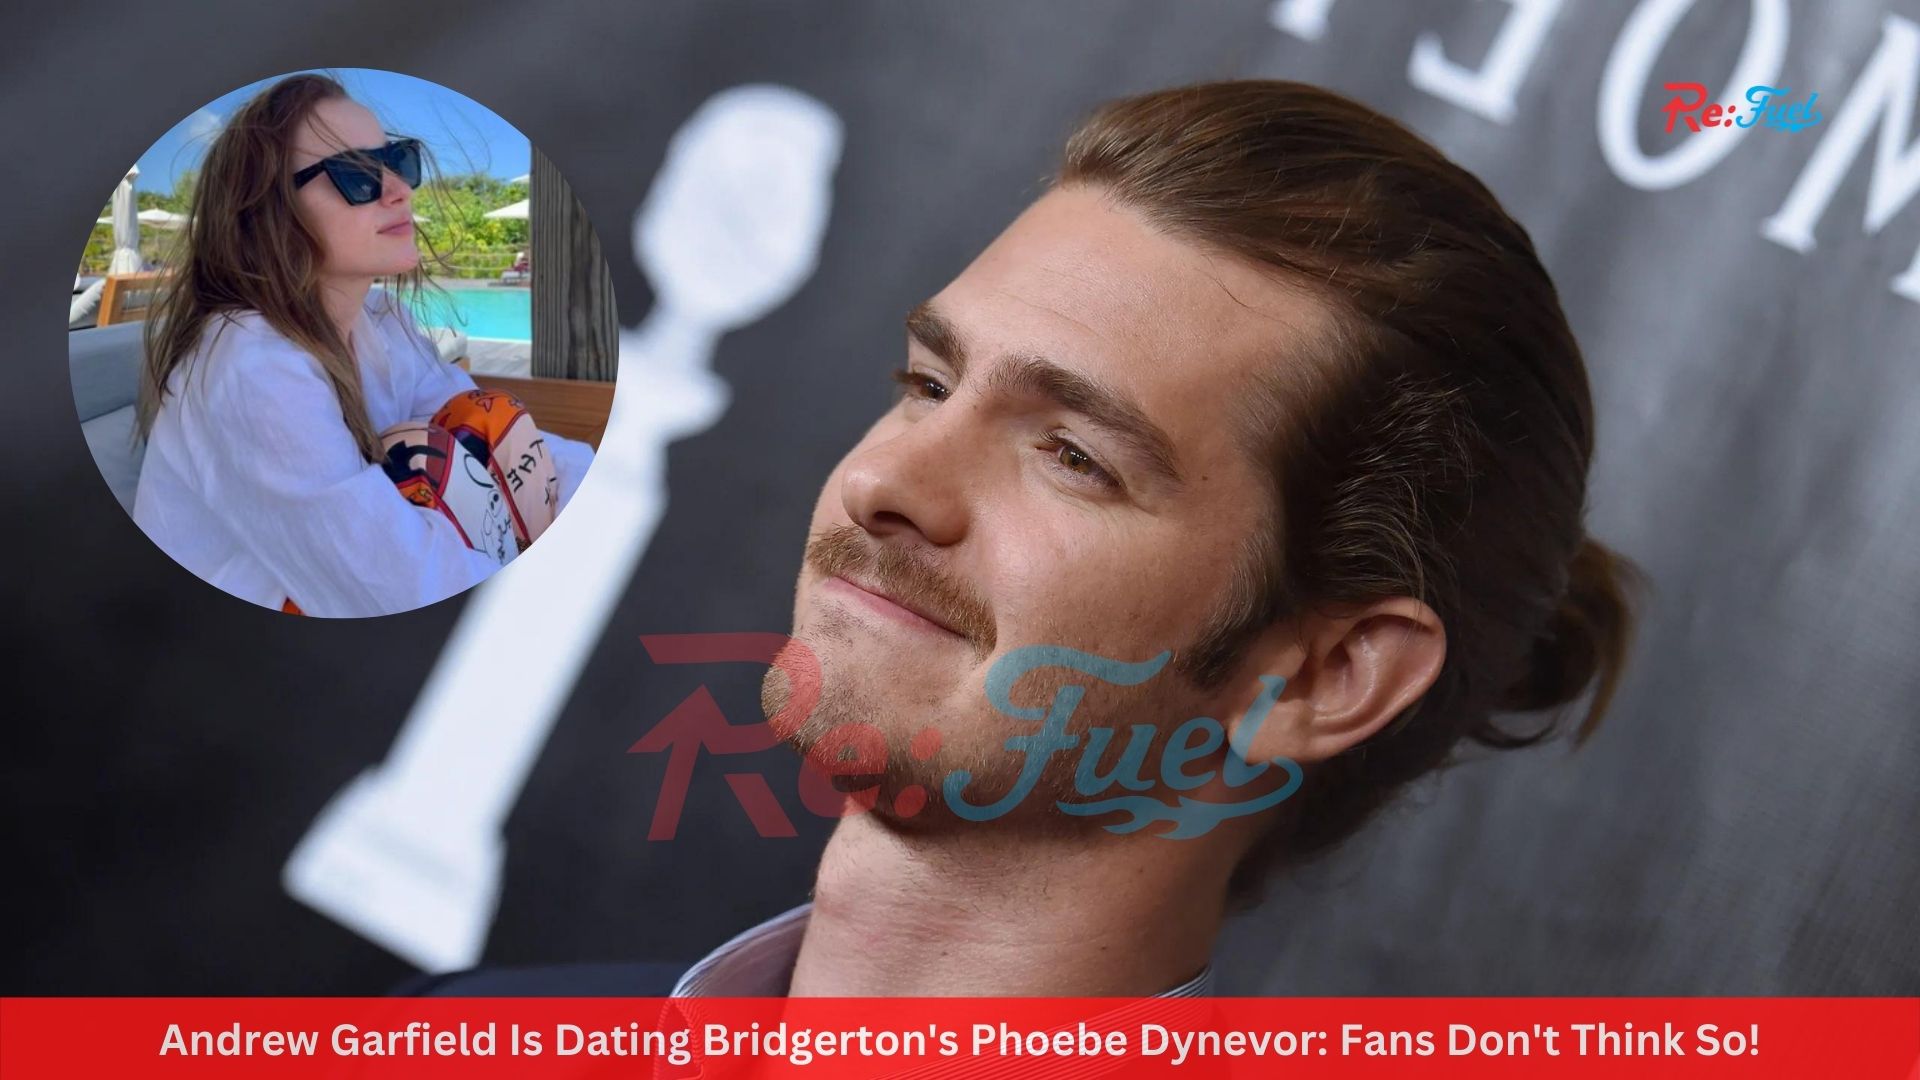 Andrew Garfield Is Dating Bridgerton's Phoebe Dynevor: Fans Don't Think So!